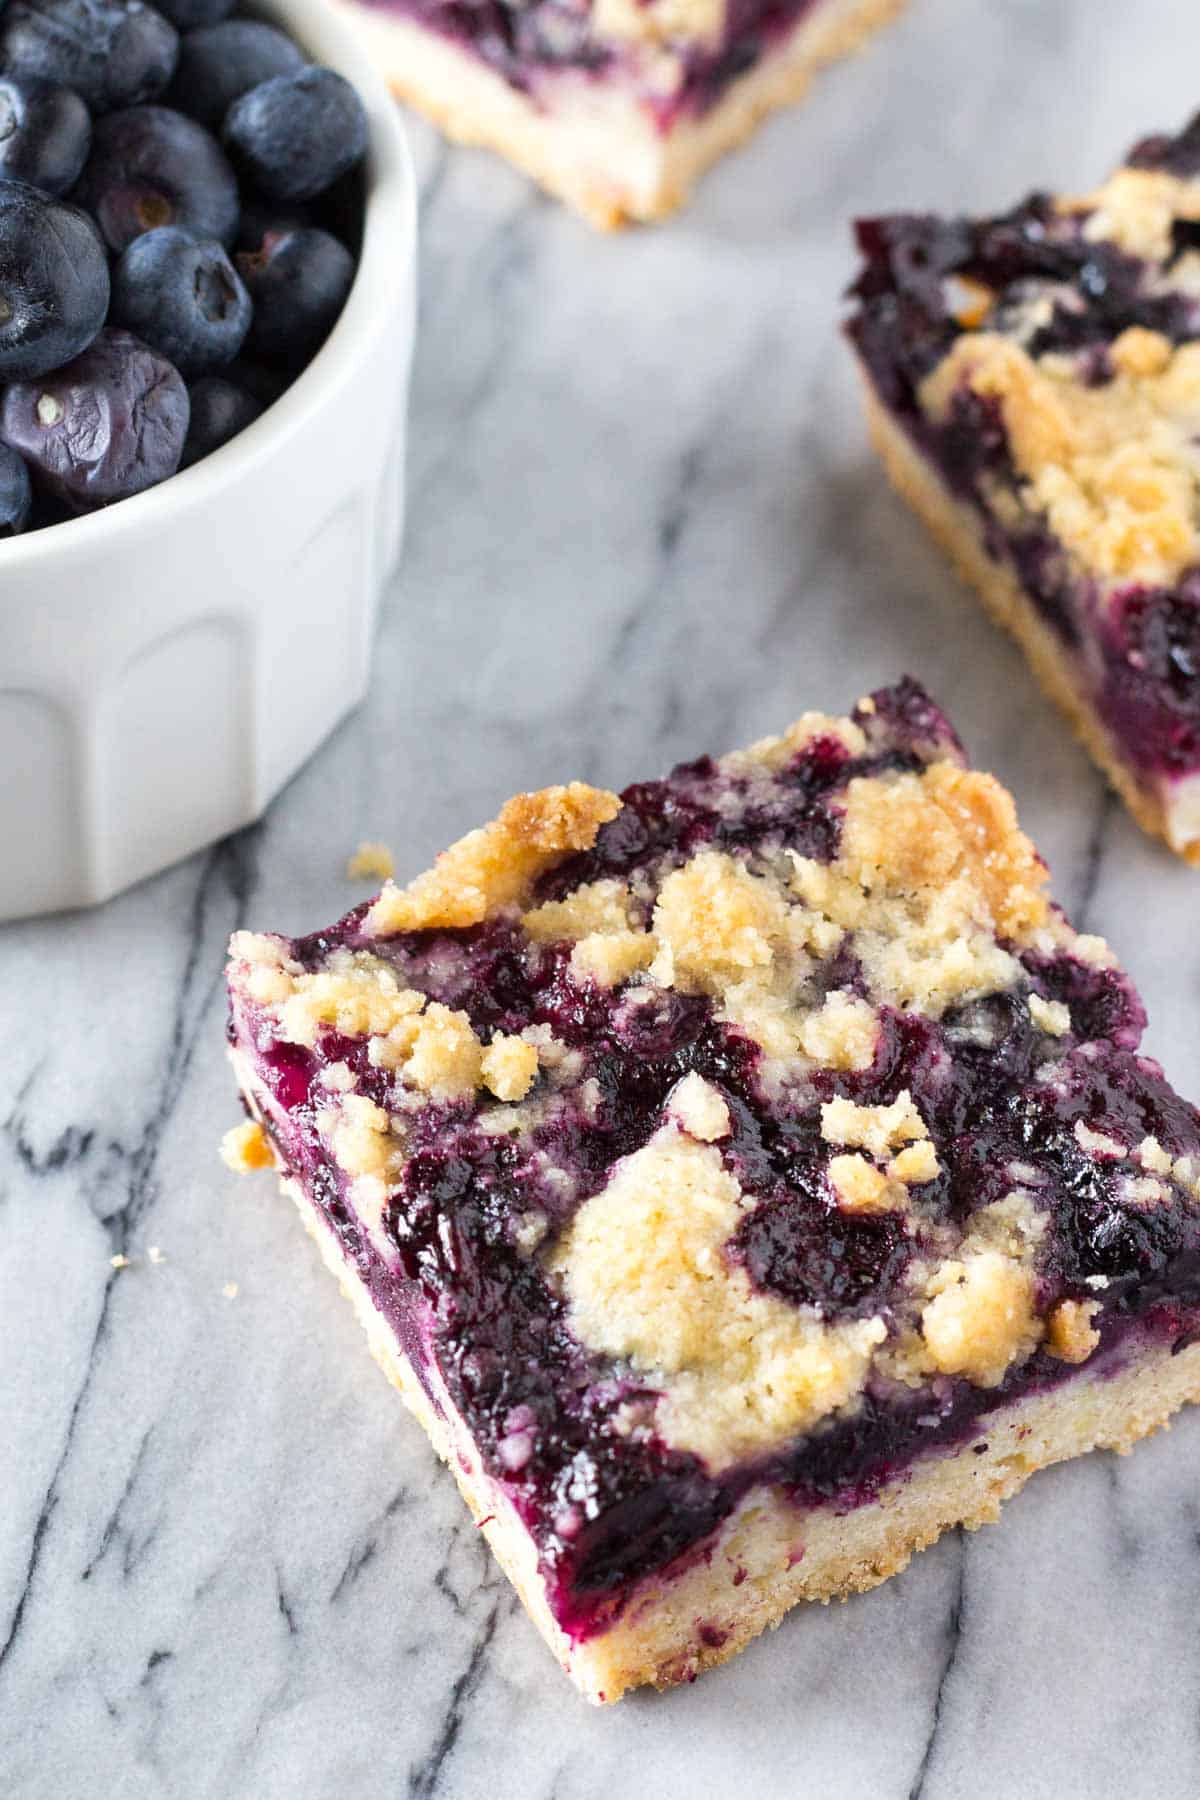 A buttery shortbread-like base, juicy blueberry filling & crumbly crumble topping - these Blueberry Crumble Bars are so easy & delicious!